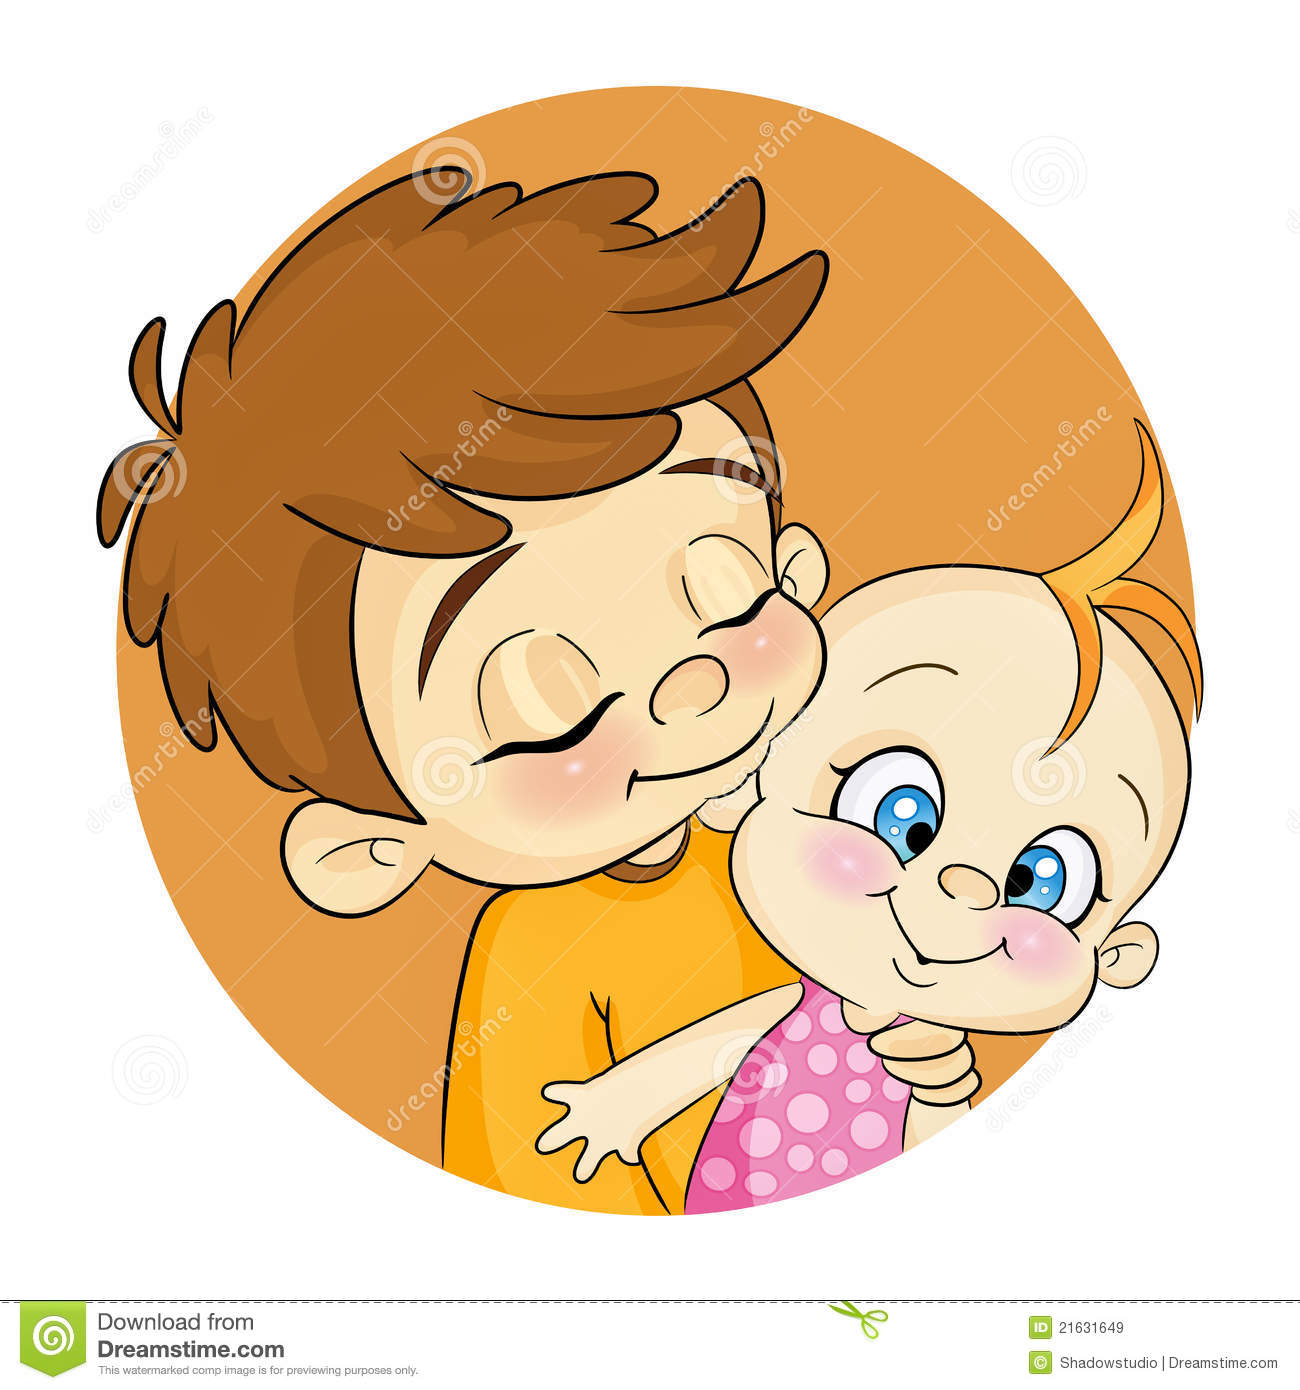 My Big Brother Clipart Free Images At Vector Clip Art | Images and ...